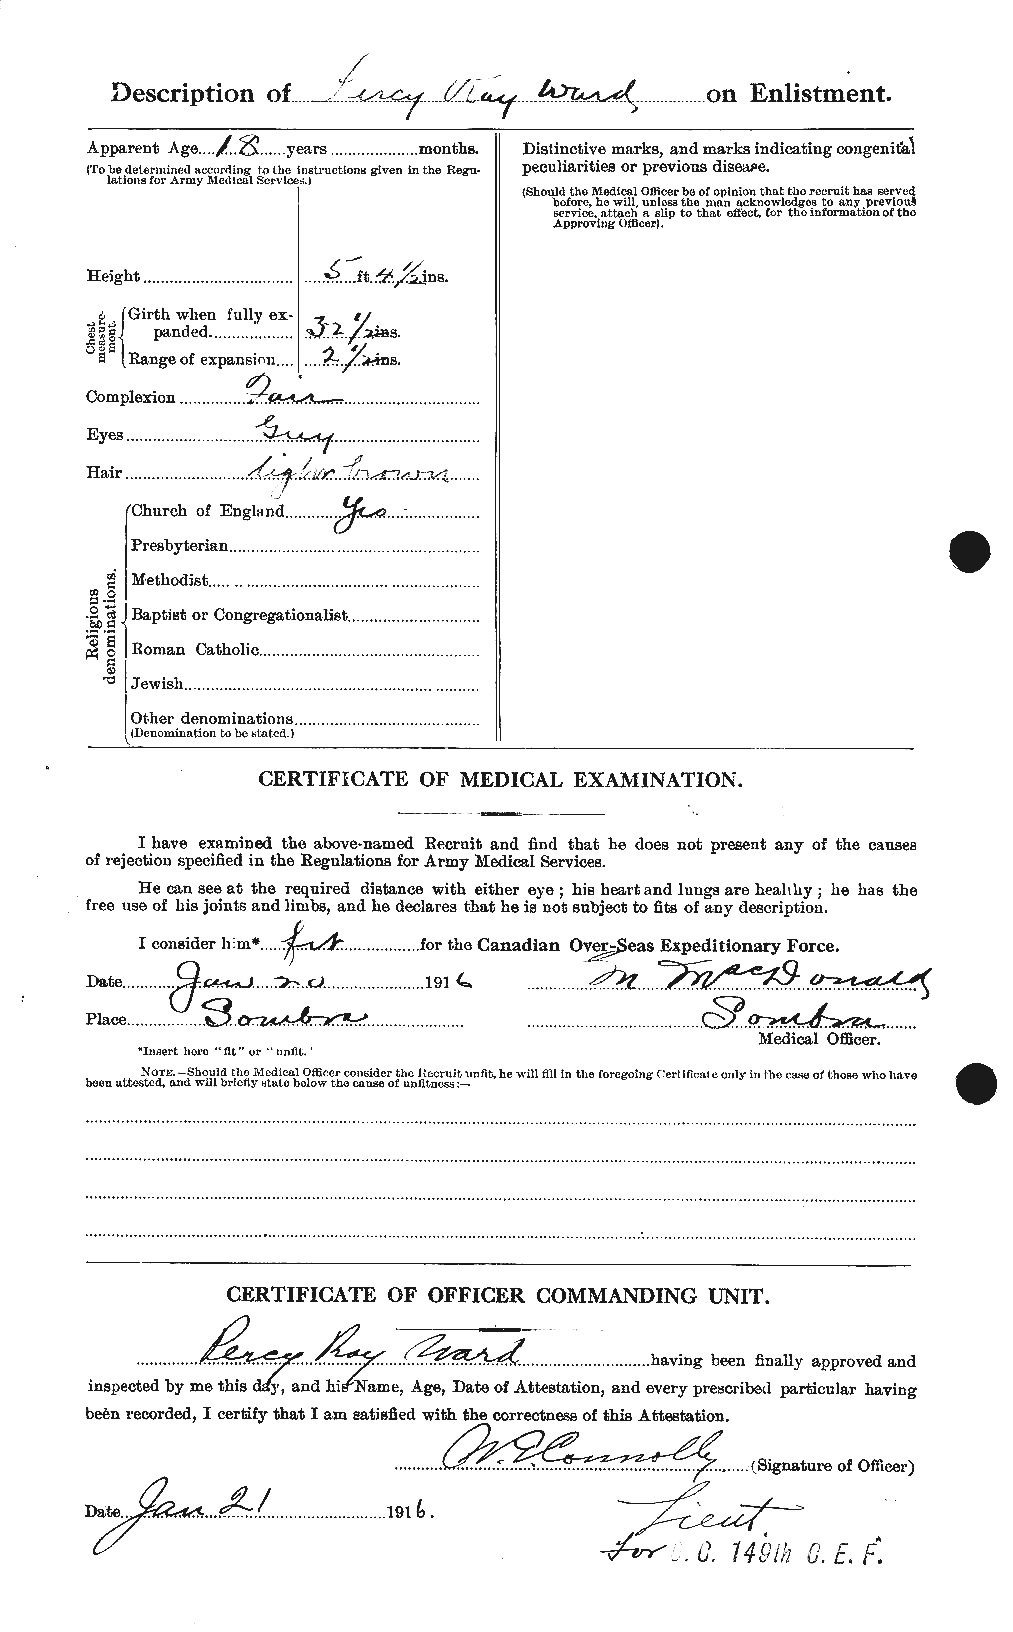 Personnel Records of the First World War - CEF 659626b